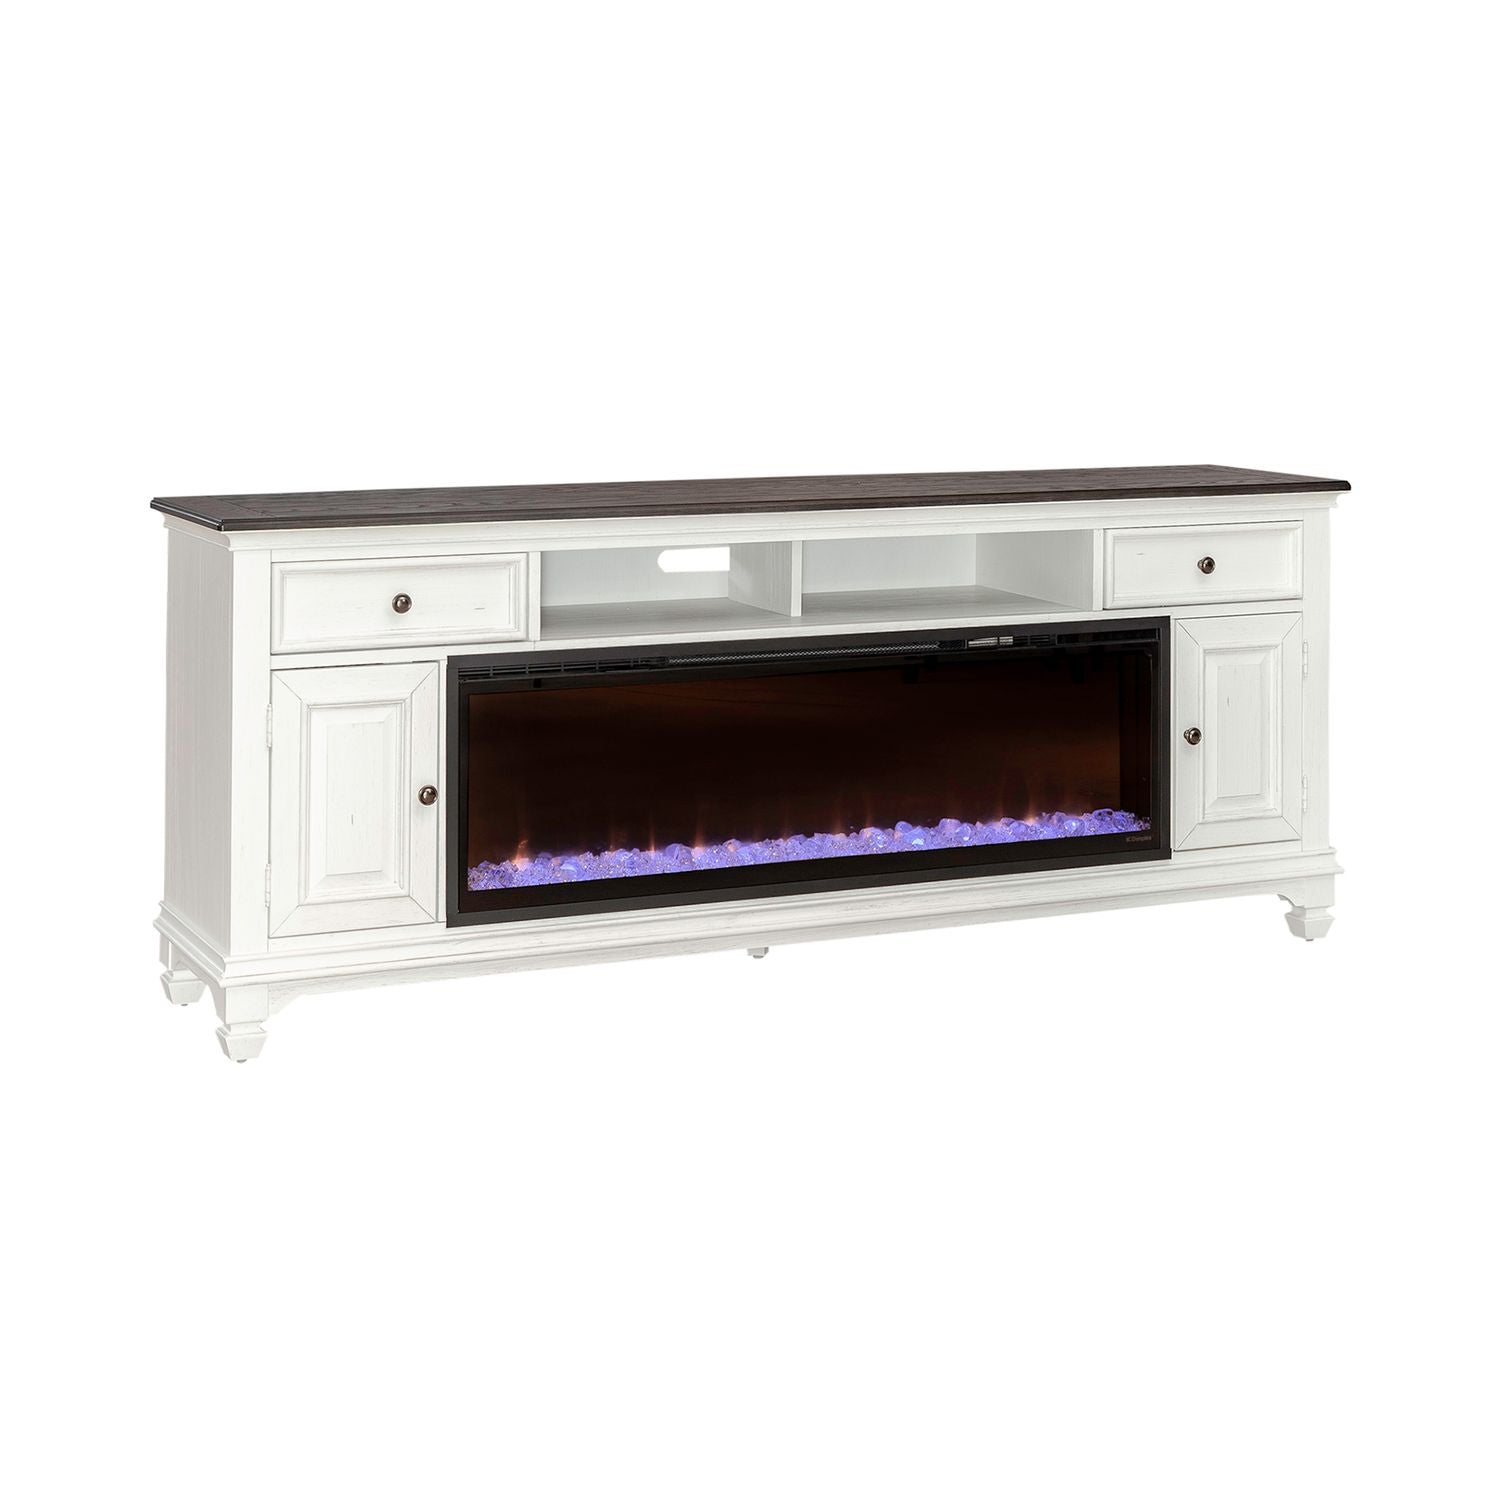 Allyson Park 417 80 Inch Fireplace TV Consoles by Liberty Furniture